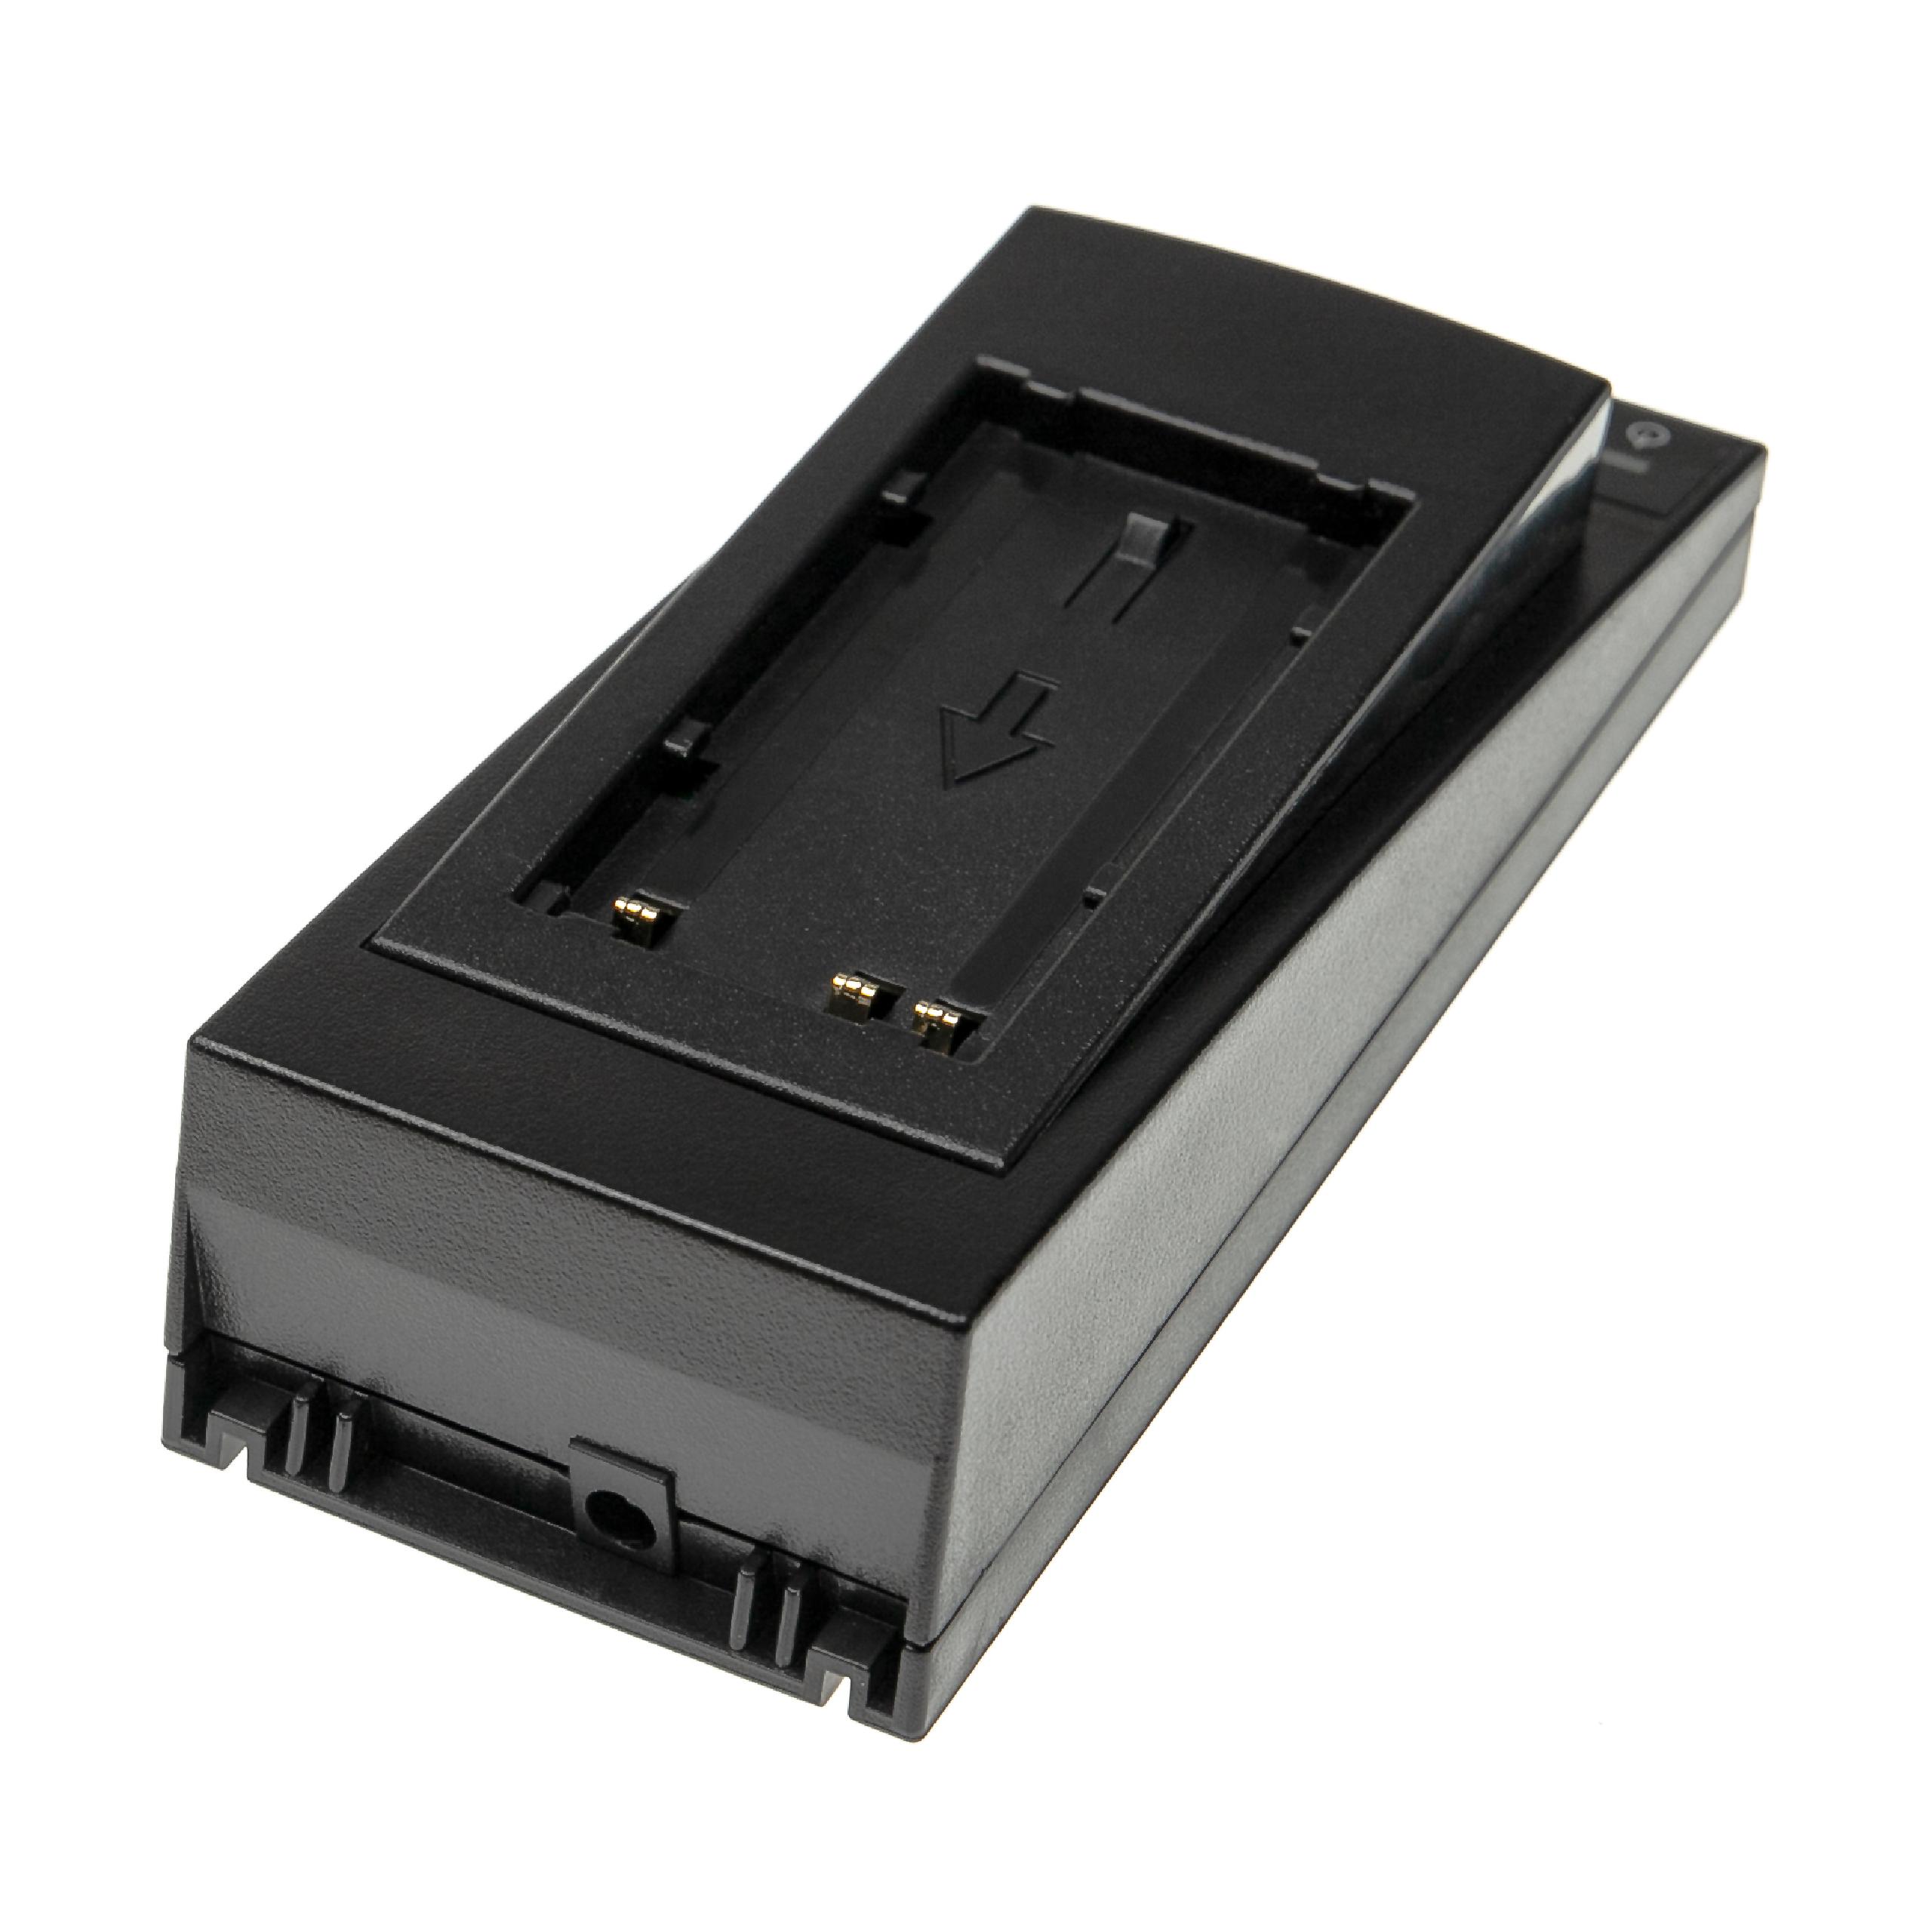 Charger Suitable for Measuring Tool / Battery etc. - Charge Dock + In-Car Cable, 7.5 V / 1.5 A